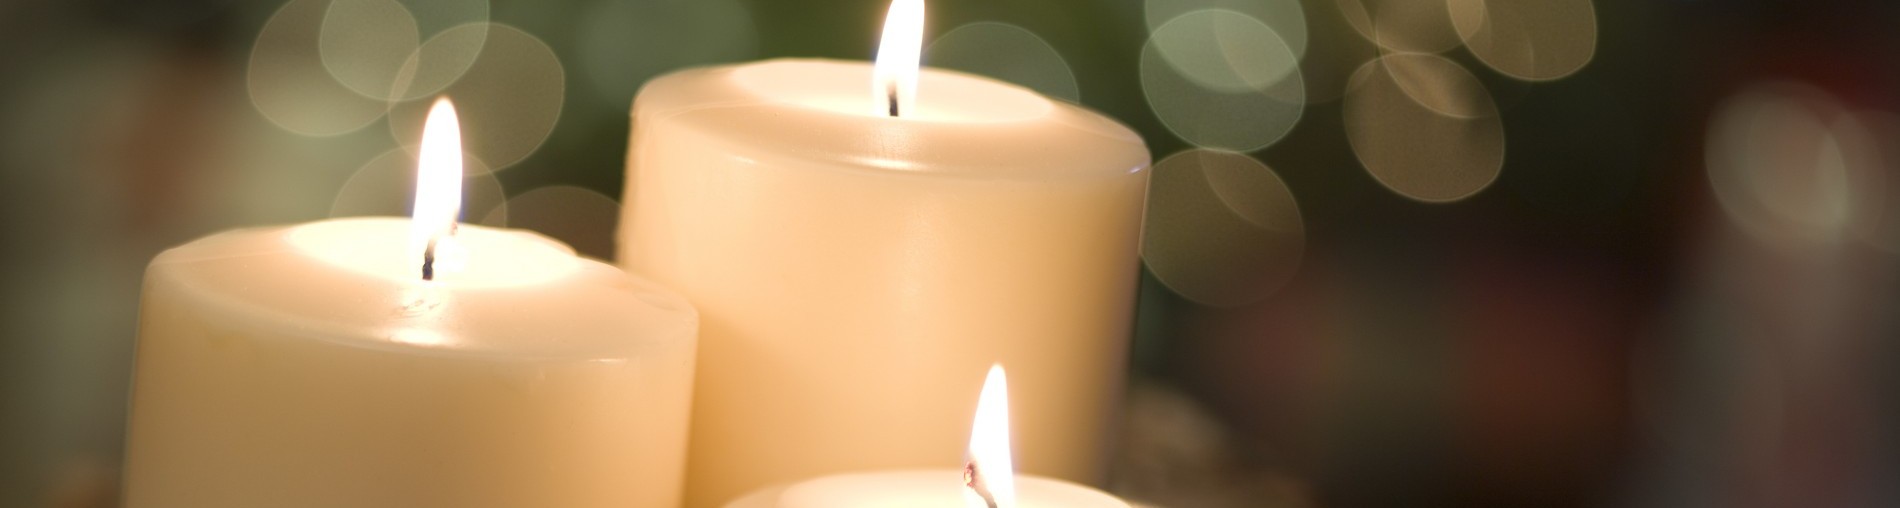 Elements of a Candle: Wax - National Candle Association